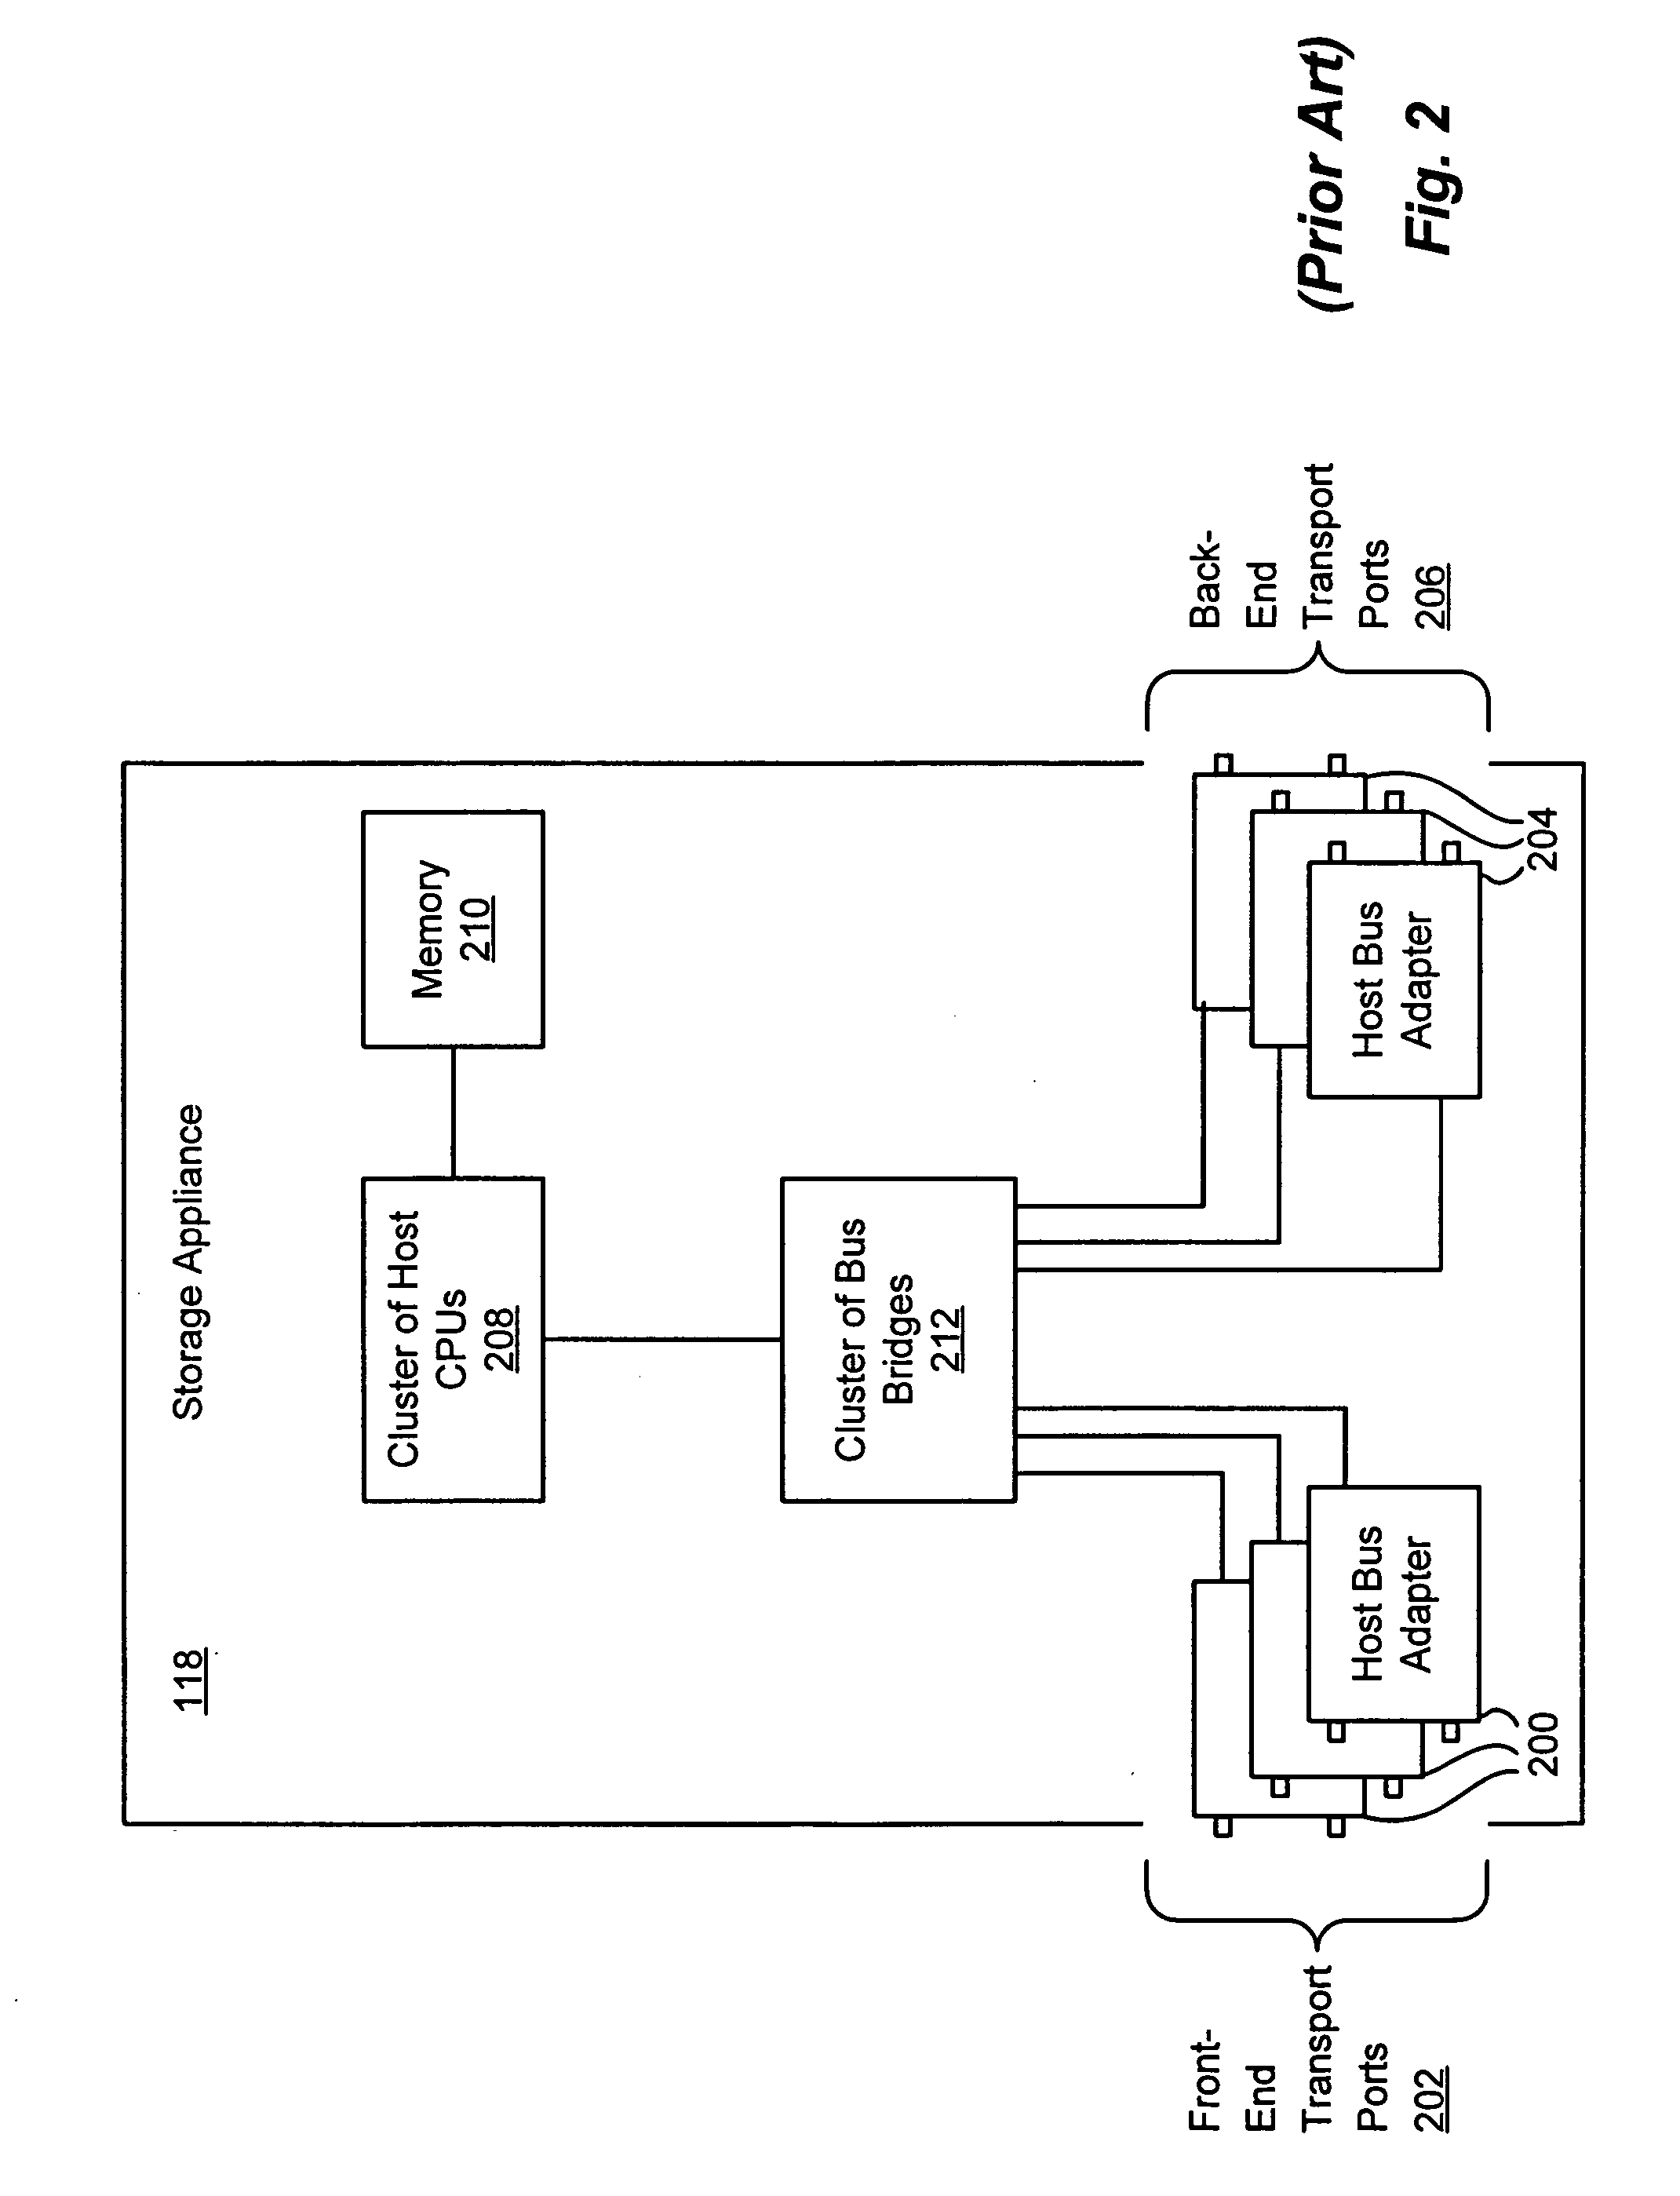 Storage processor for handling disparate requests to transmit in a storage appliance